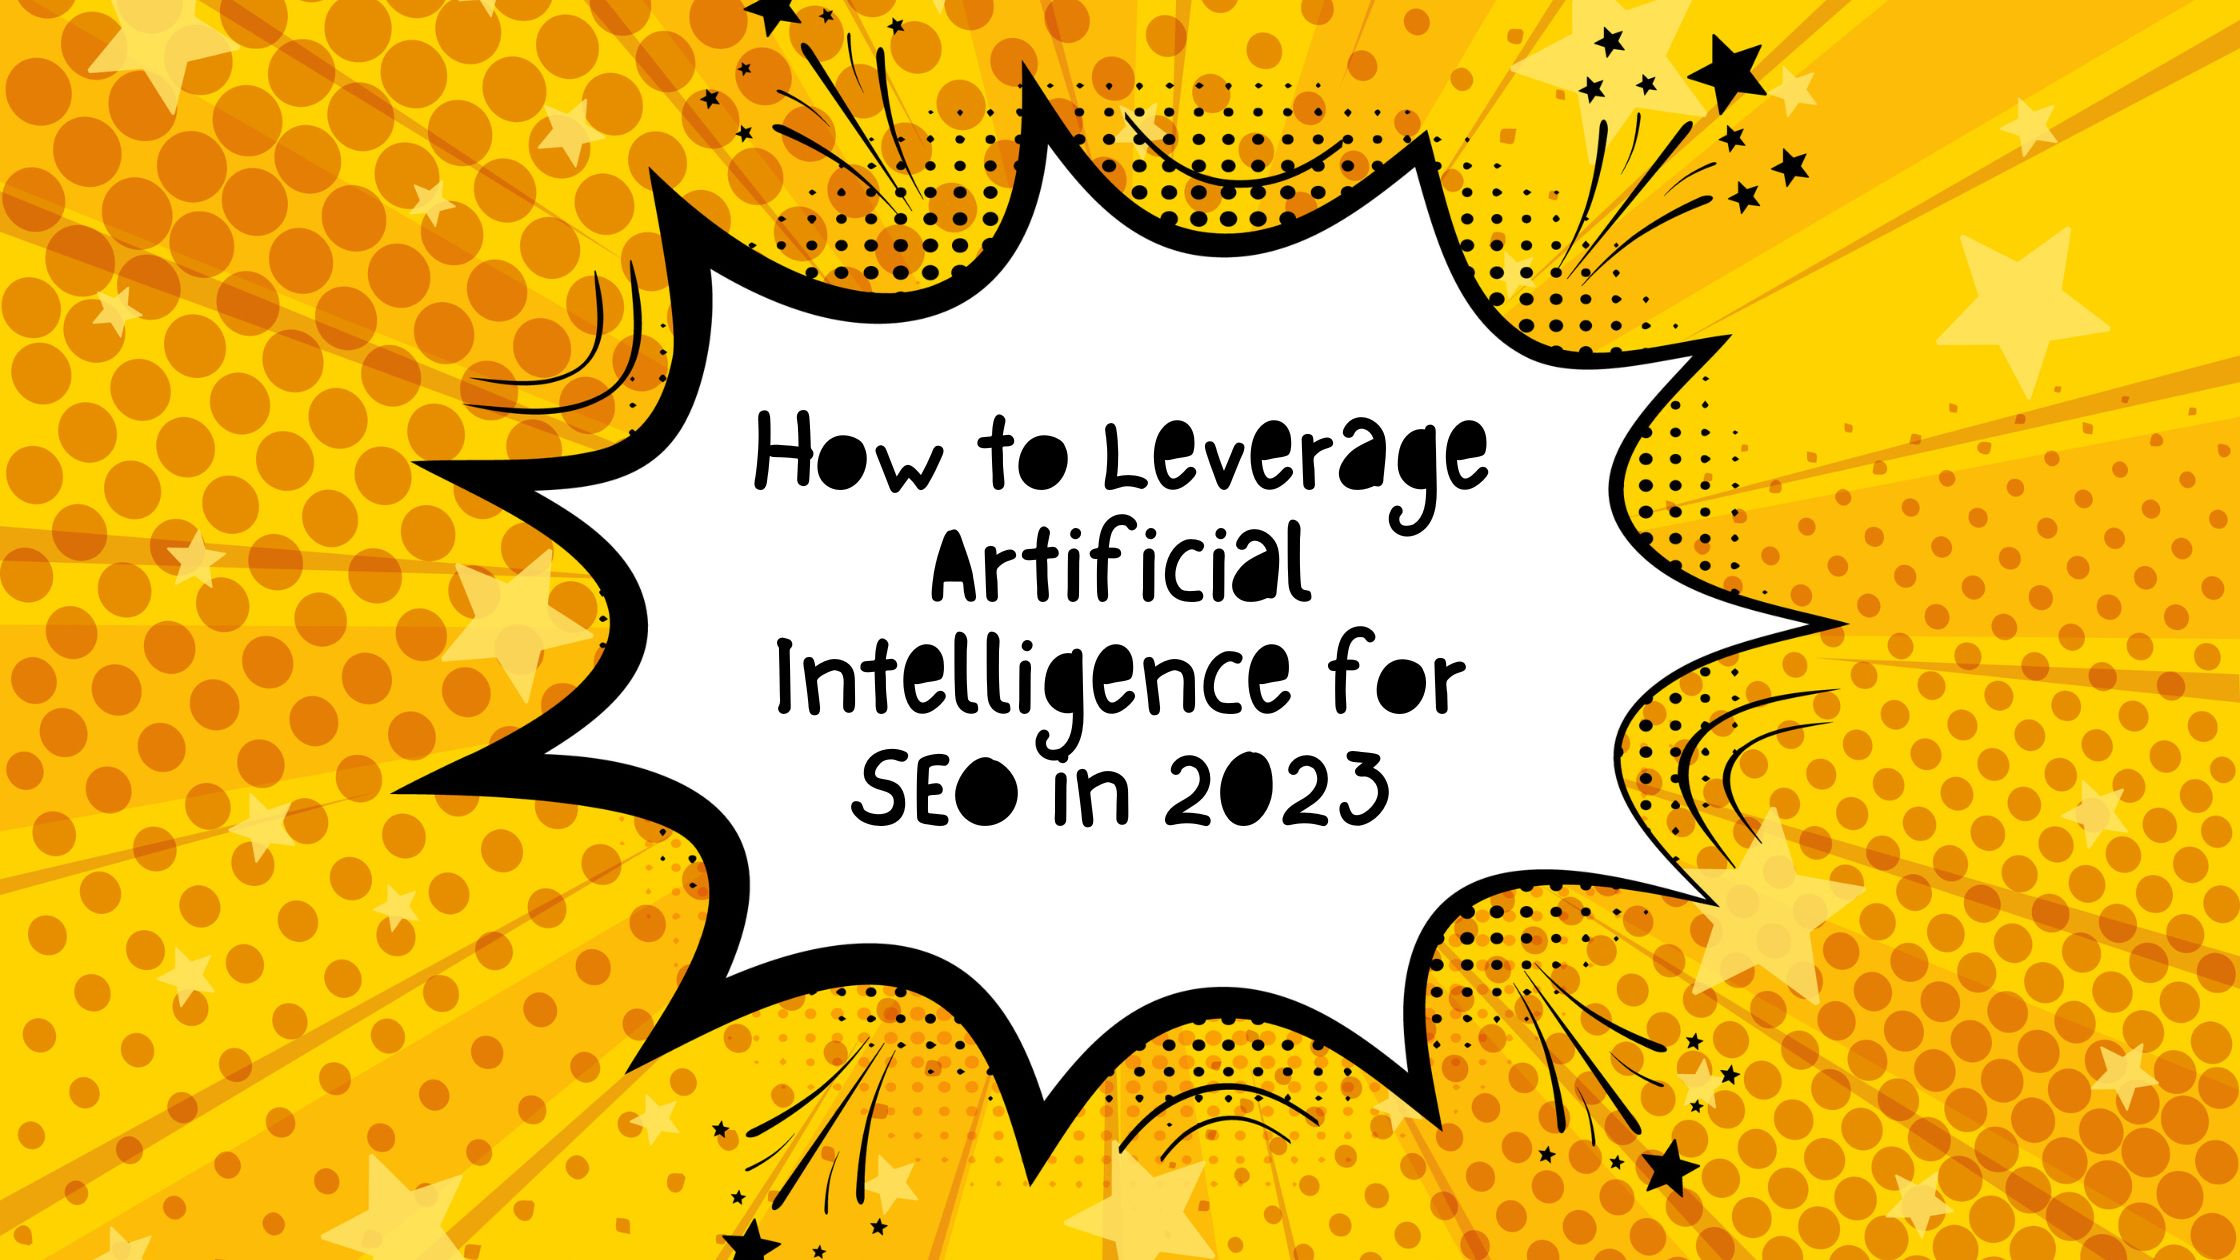 How to Leverage Artificial Intelligence for SEO in 2023